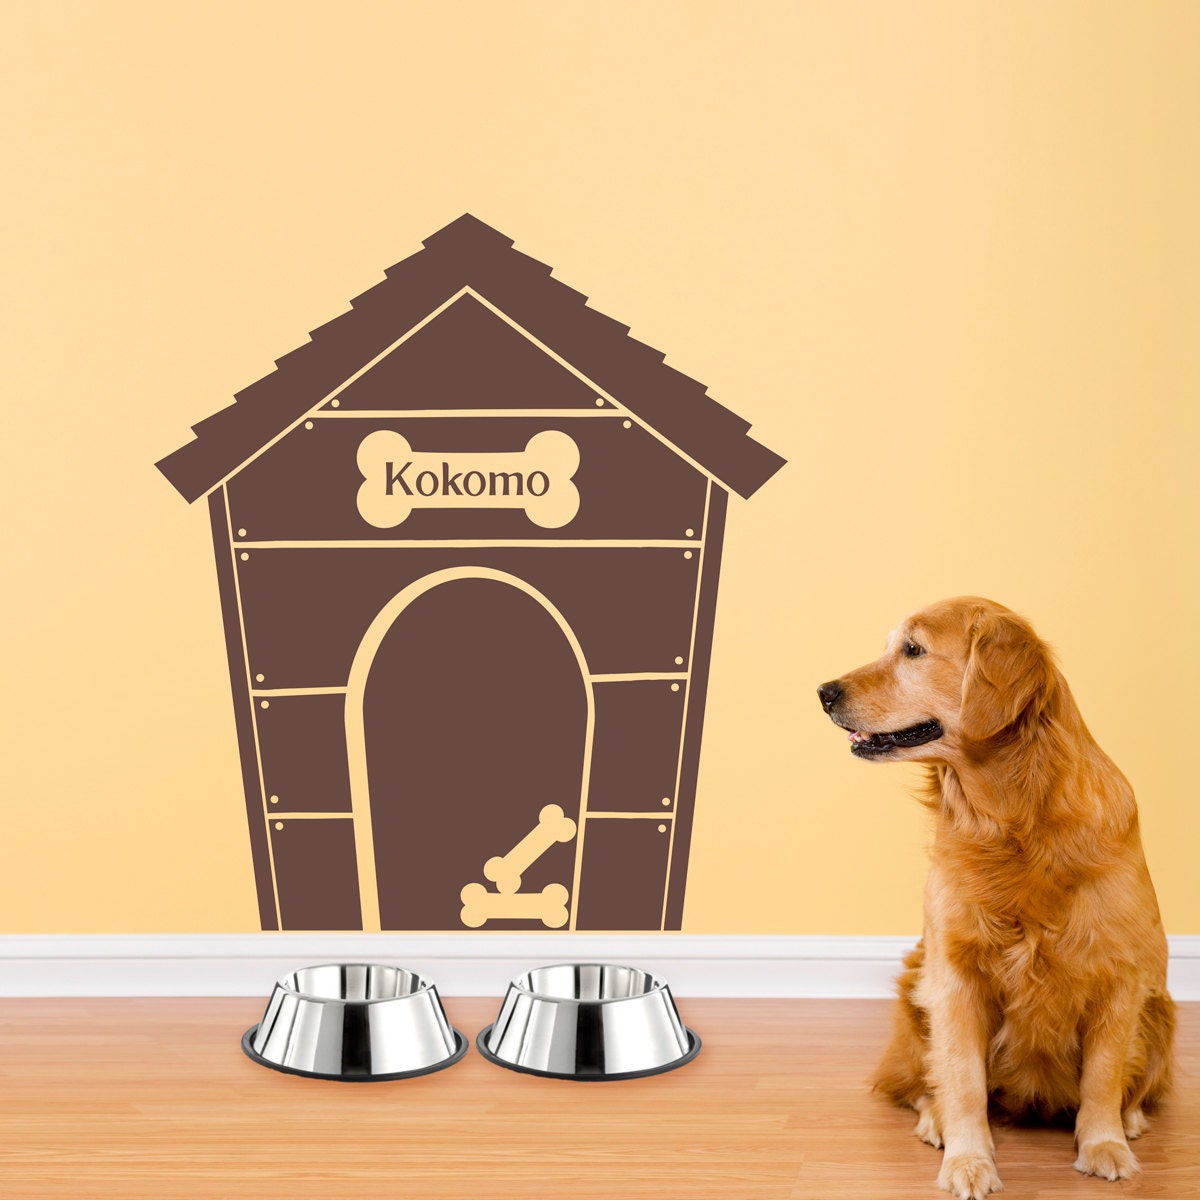 Personalized Dog Decal - Dog House Wall Sticker - Dog Name Decal - Pet Decor